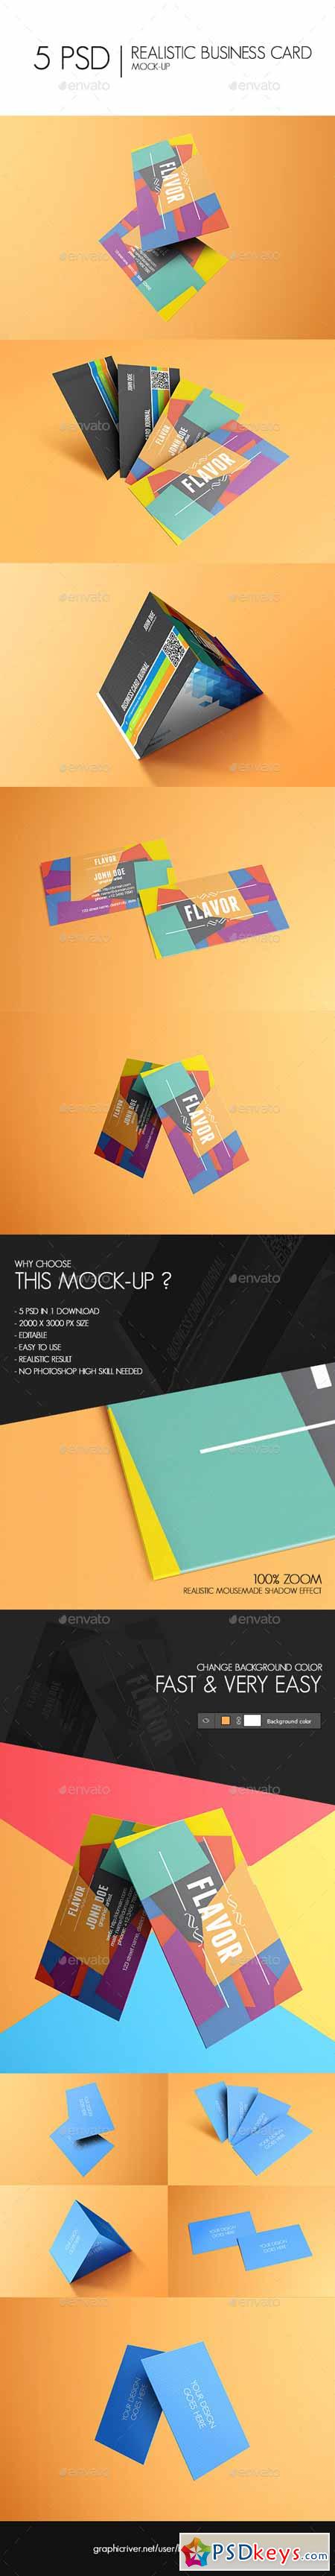 Realistic Business Card Mock-Up 11799947